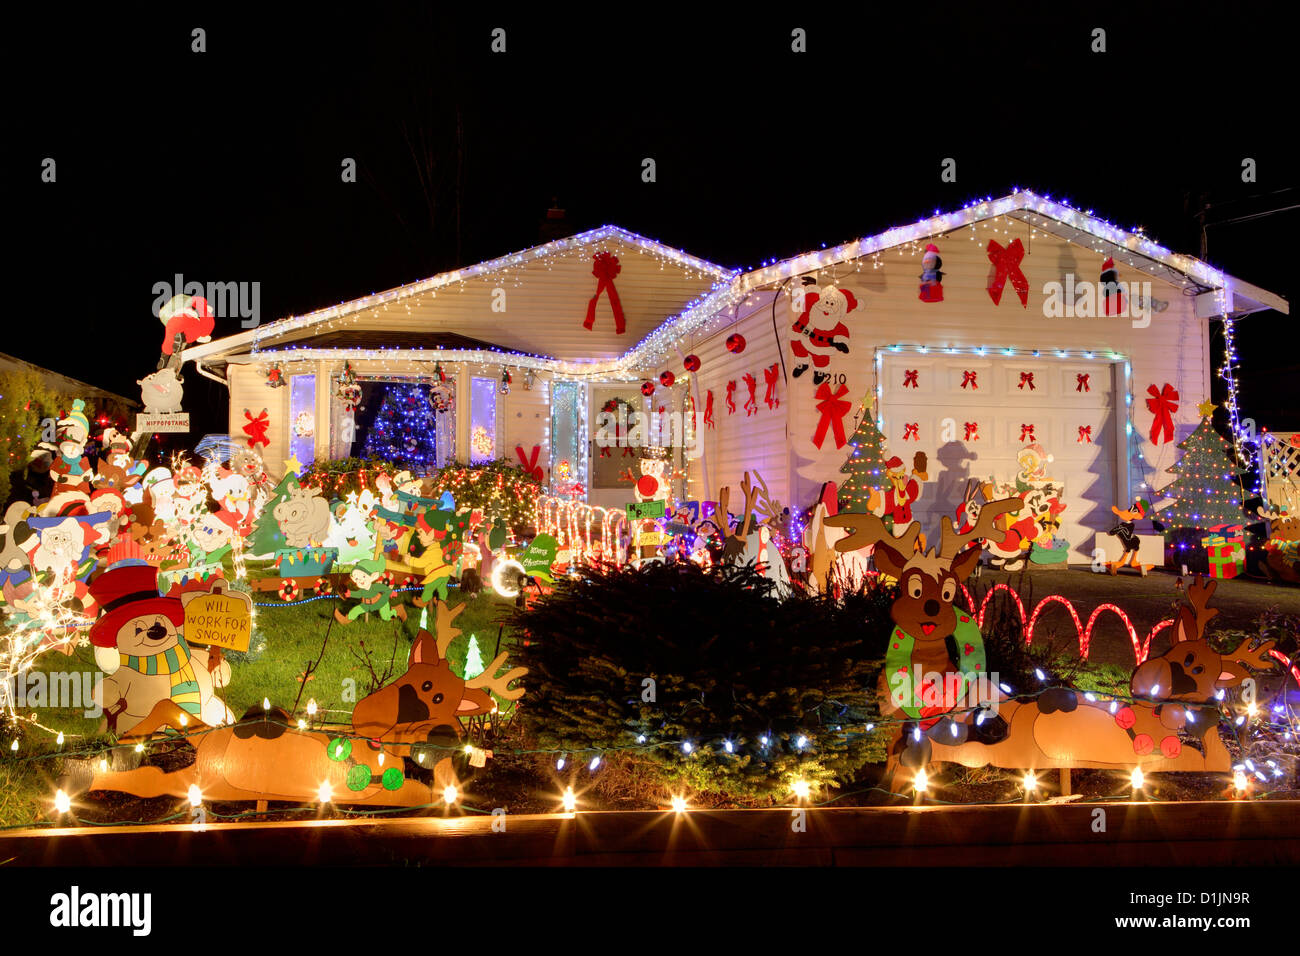 House lit up for annual Christmas season.-Victoria, British Columbia, Canada. Stock Photo